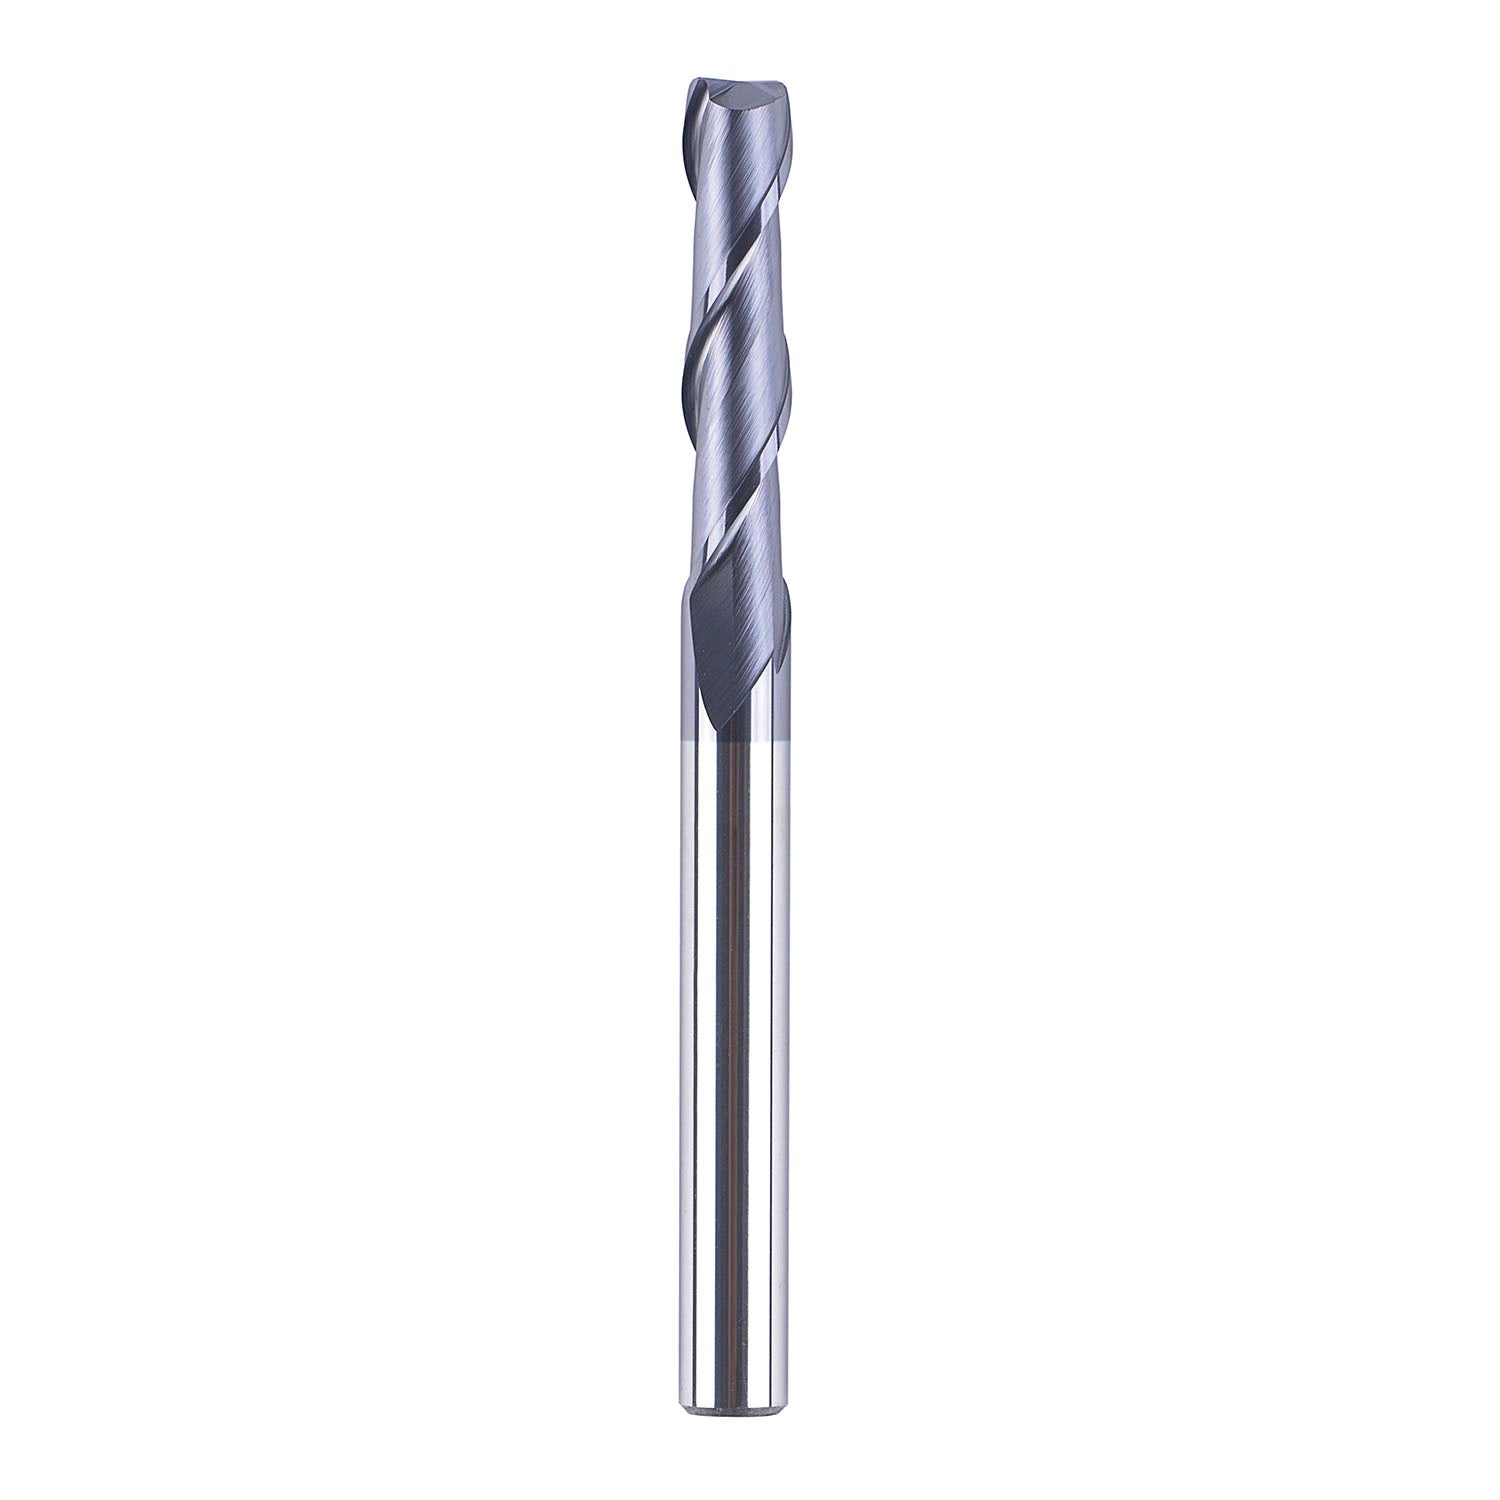 SpeTool 2 Flute 1/4" Shank Extra 3" Long Carbide End Mill TiAlN Coated